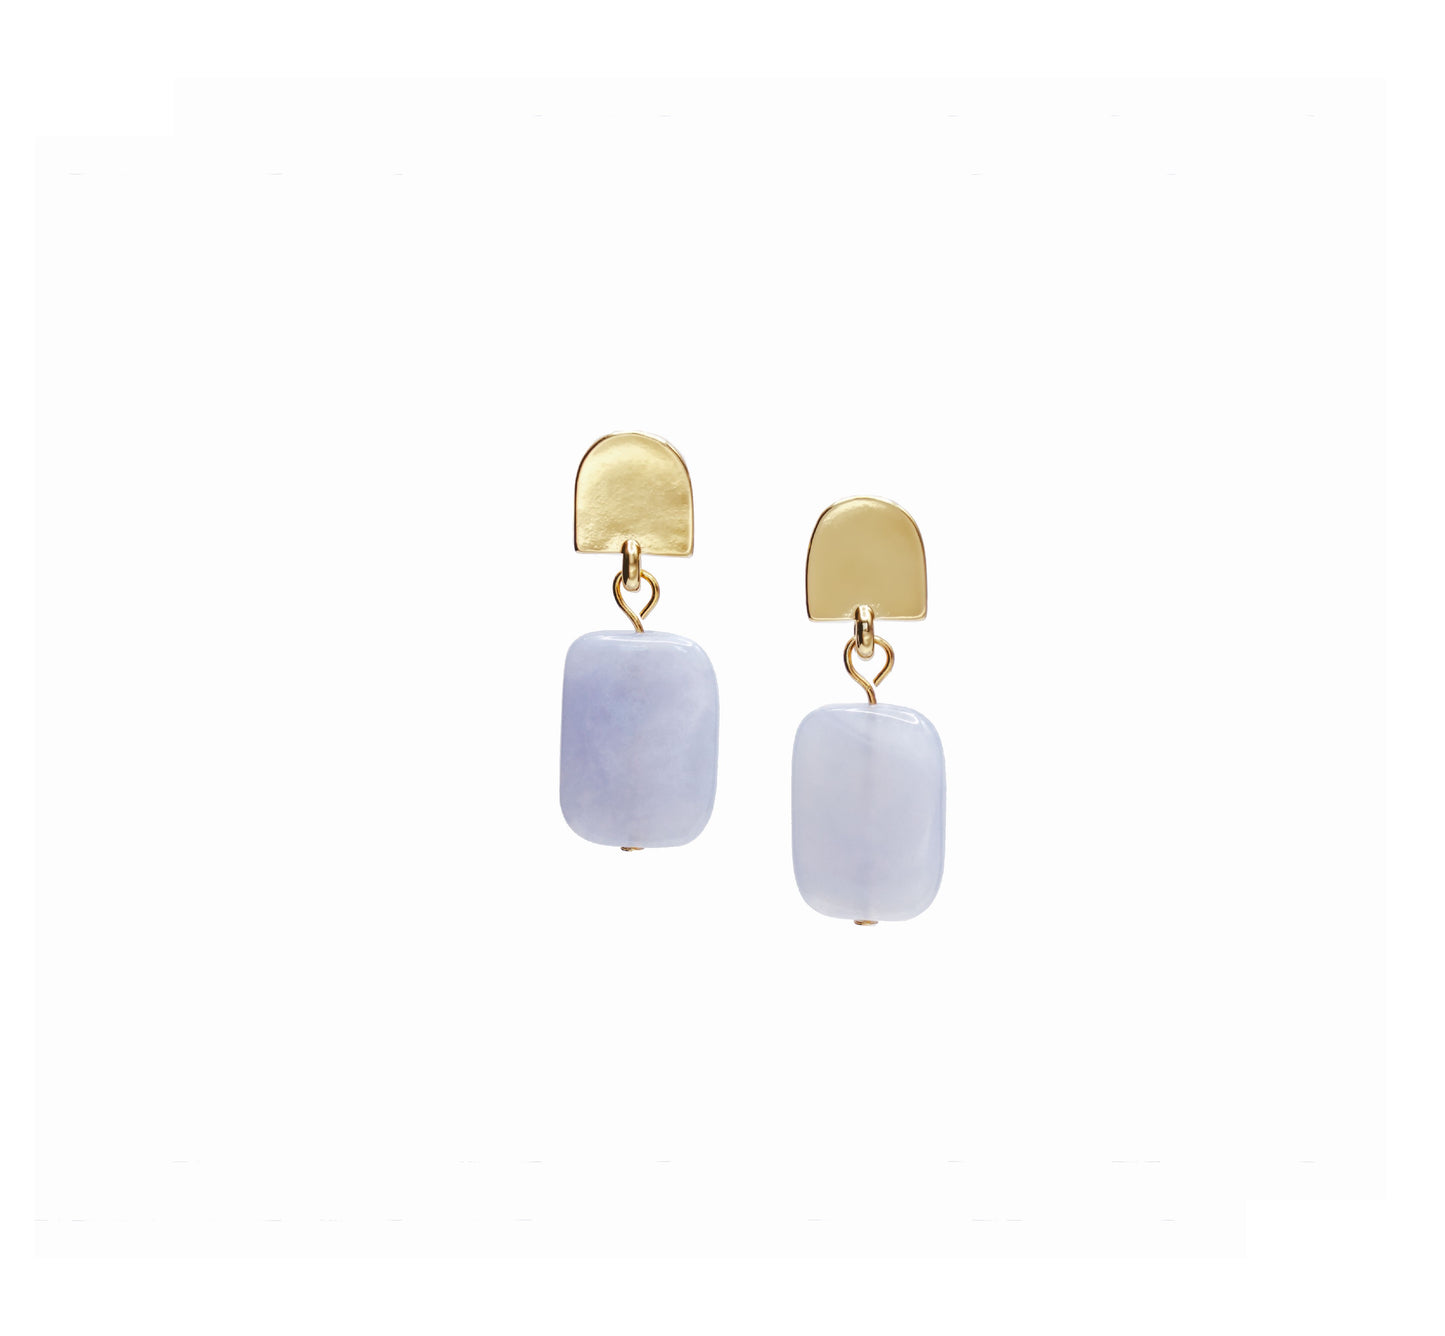 gold dome + baby blue agate earrings - gold dome + baby blue agate earrings - VUE by SEK